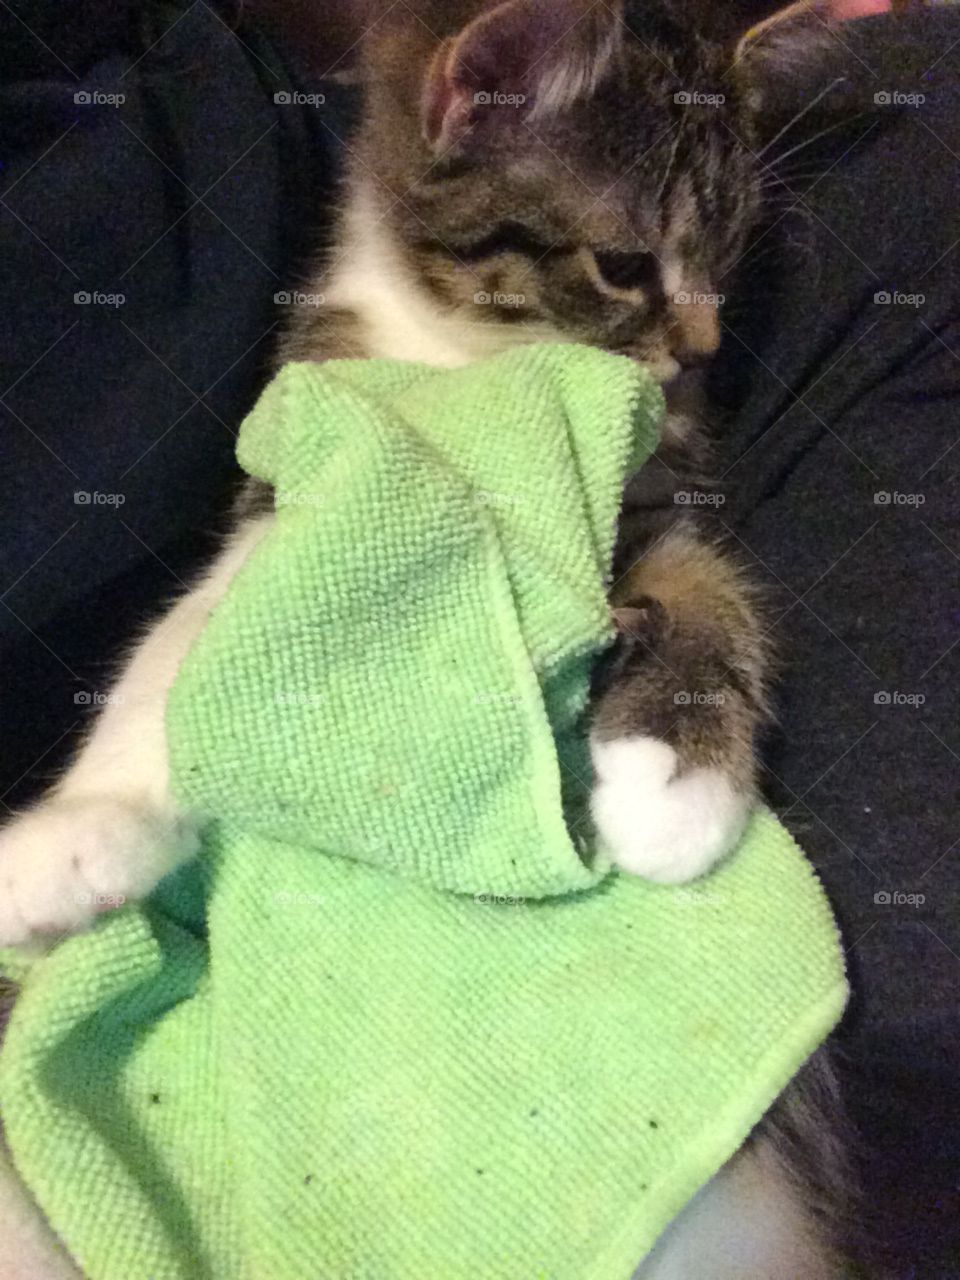 Kitten using a face cloth for a blanket